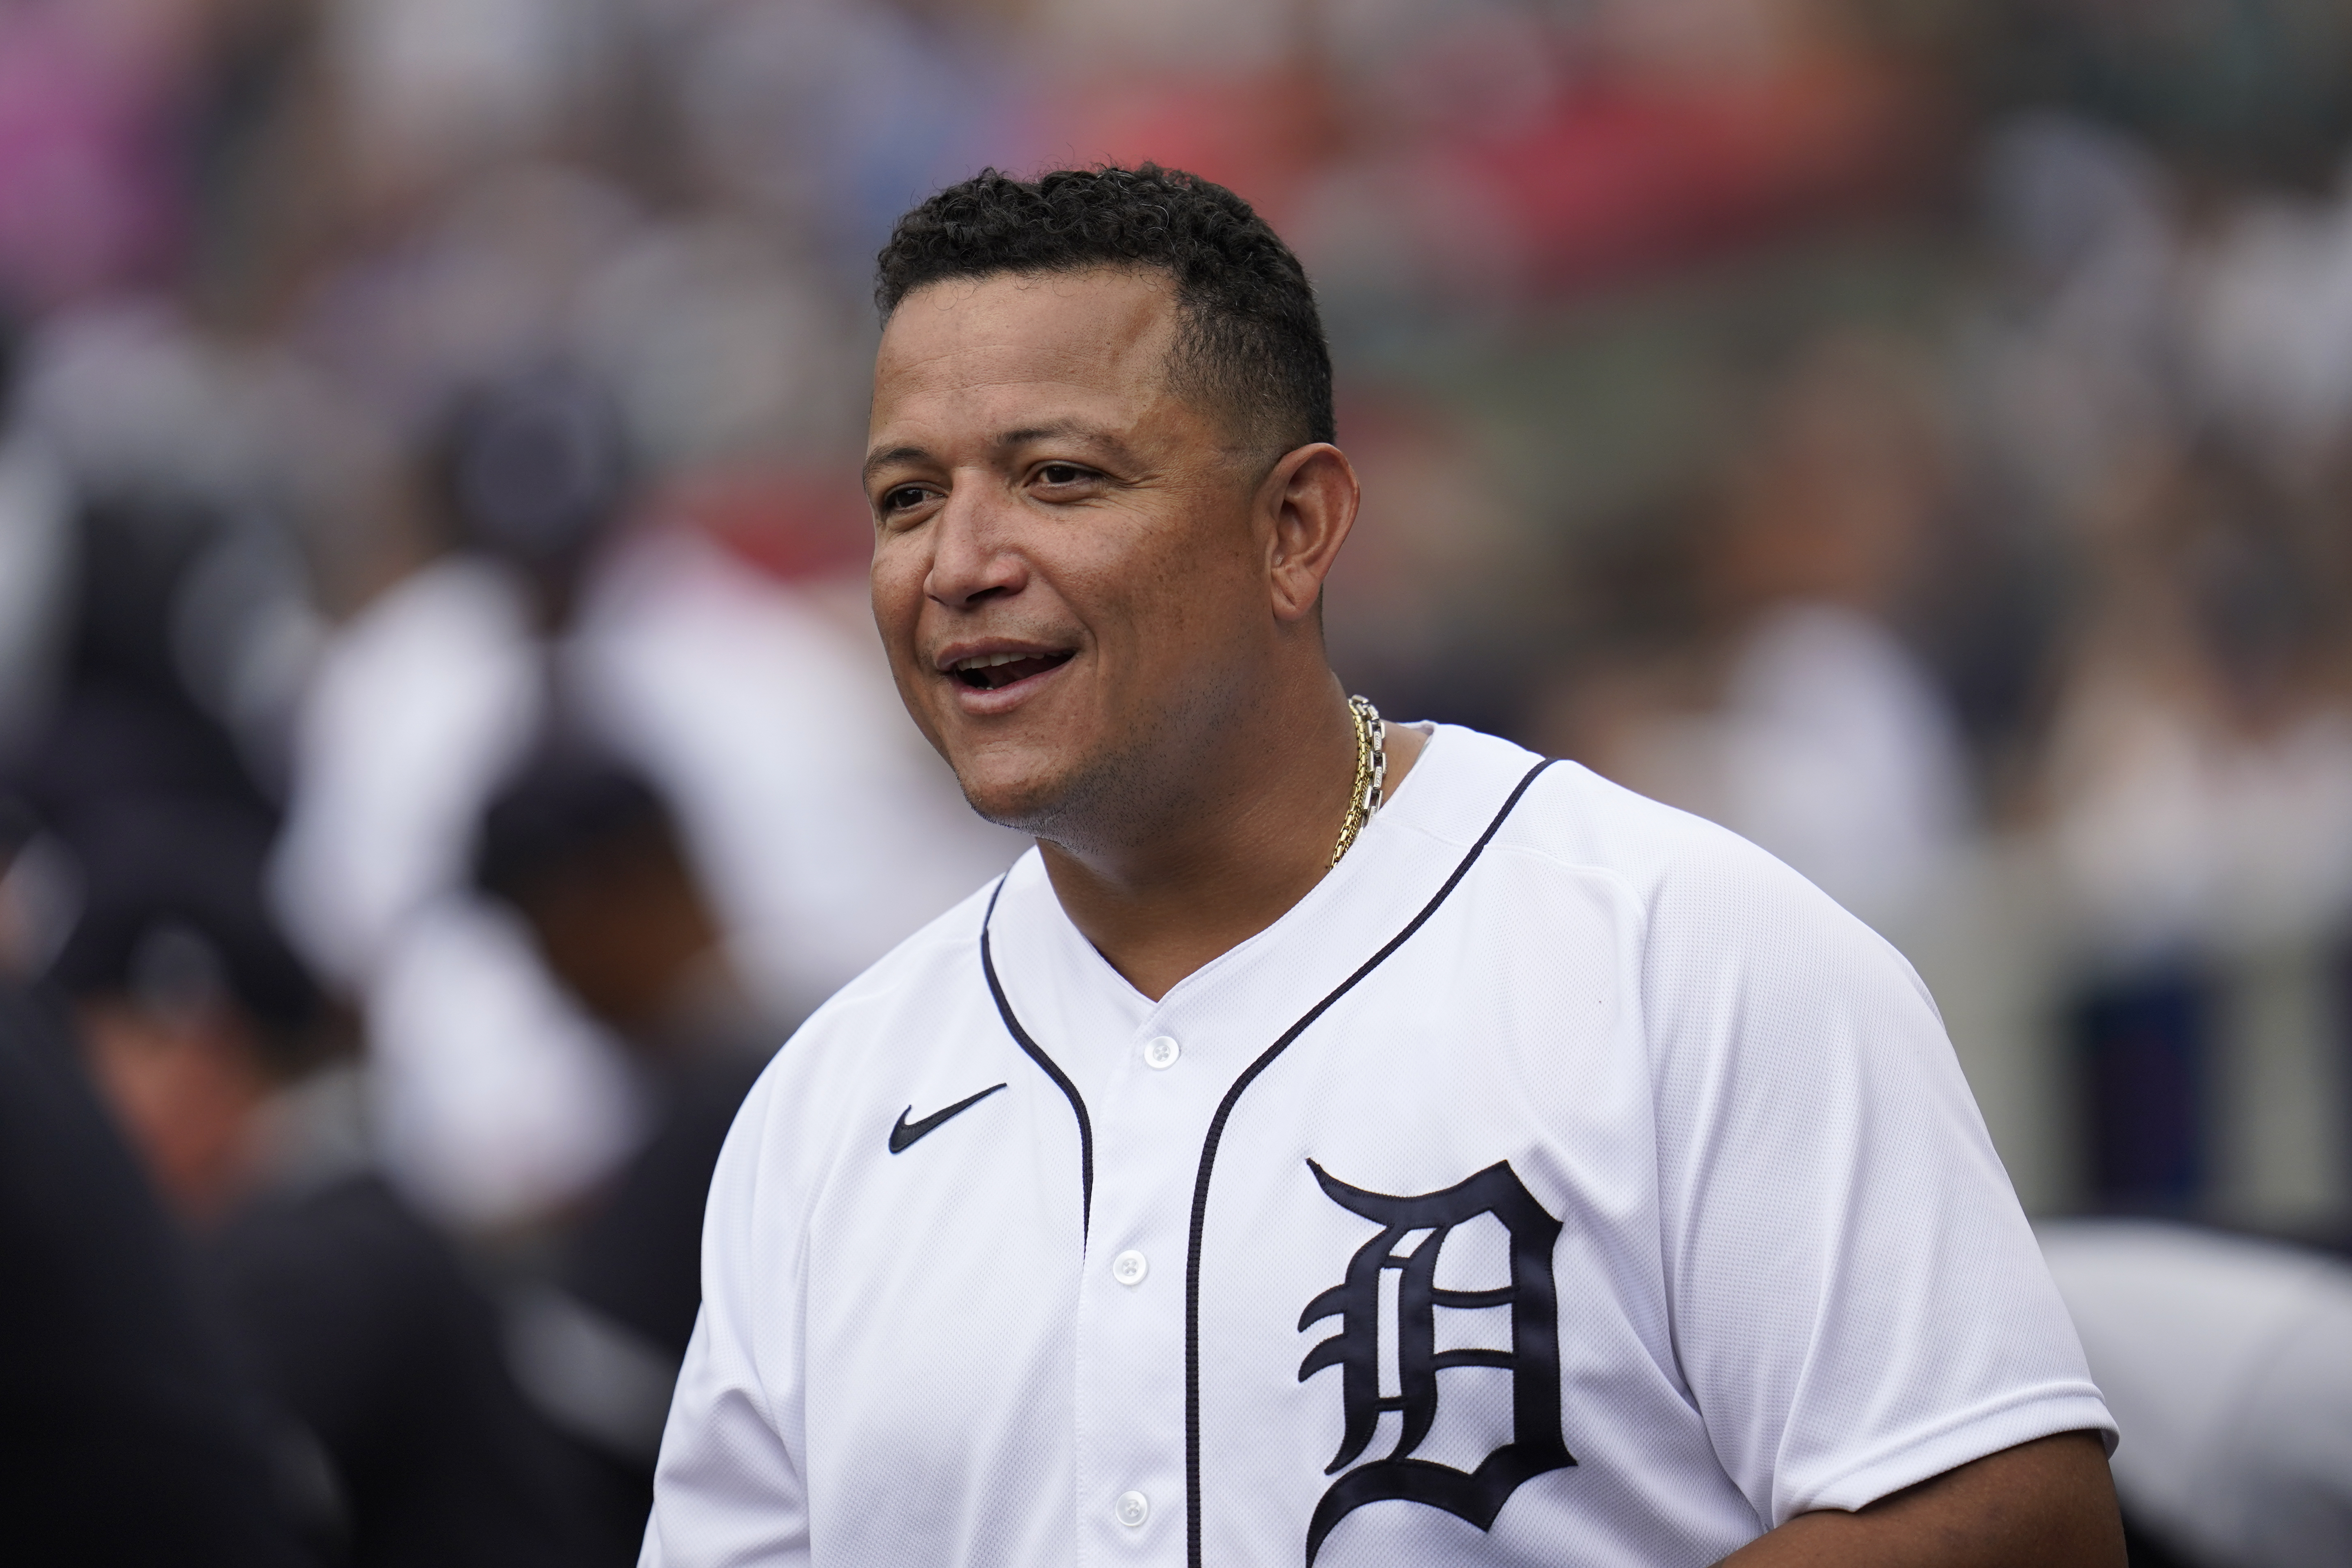 Miguel Cabrera hits 500th career home run against Blue Jays